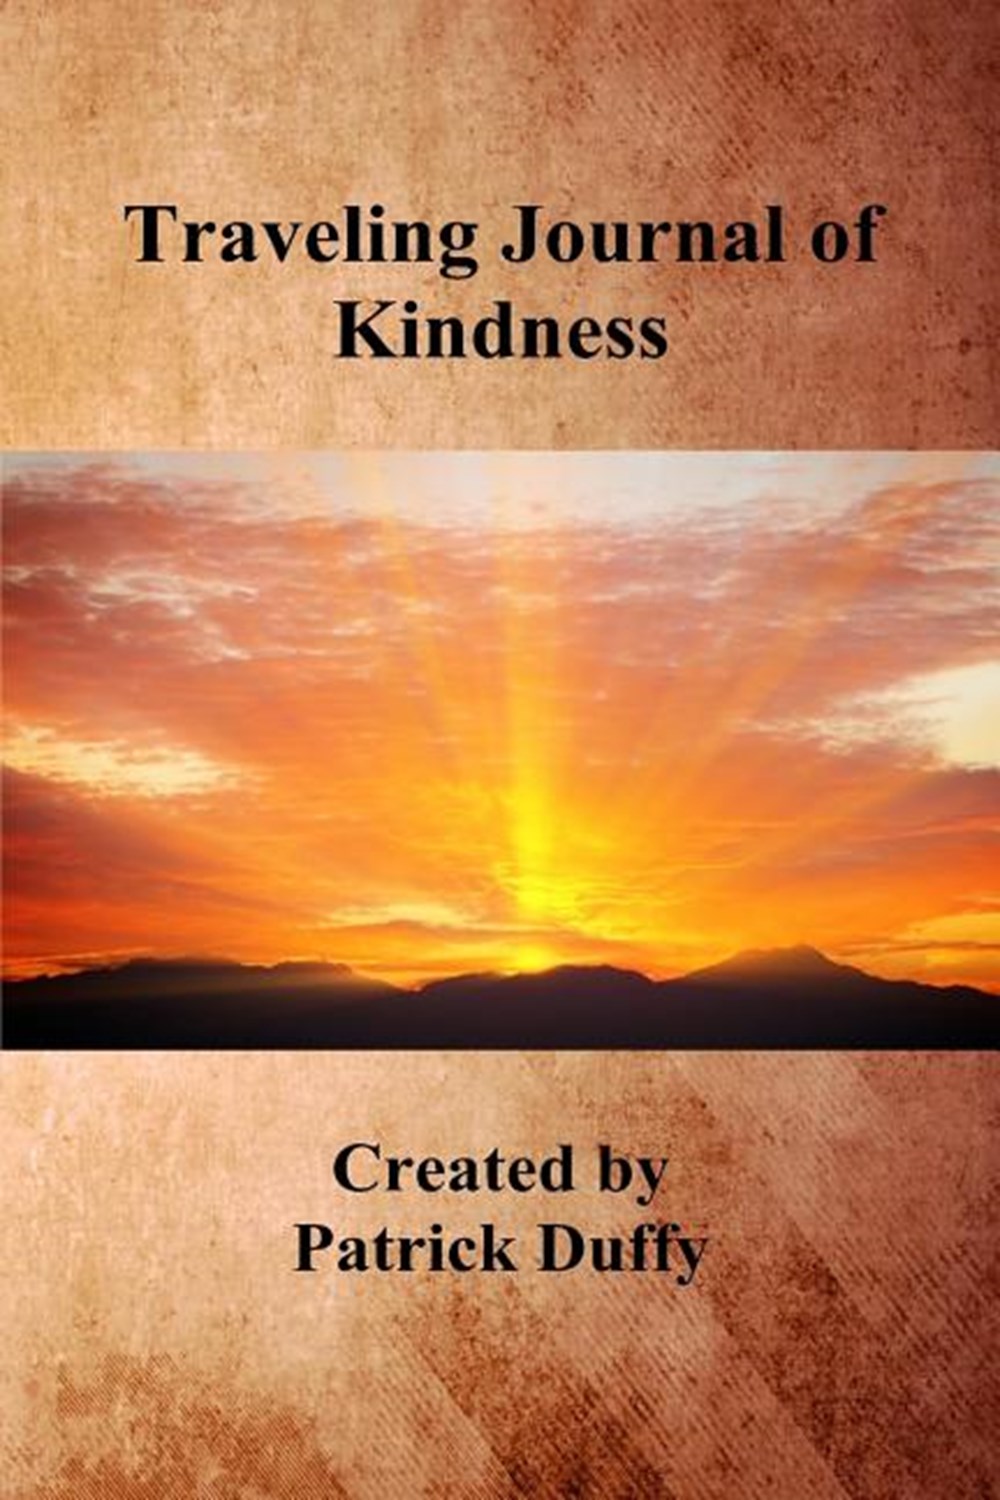 Traveling Journal of Kindness A Traveling Journal of Kindness